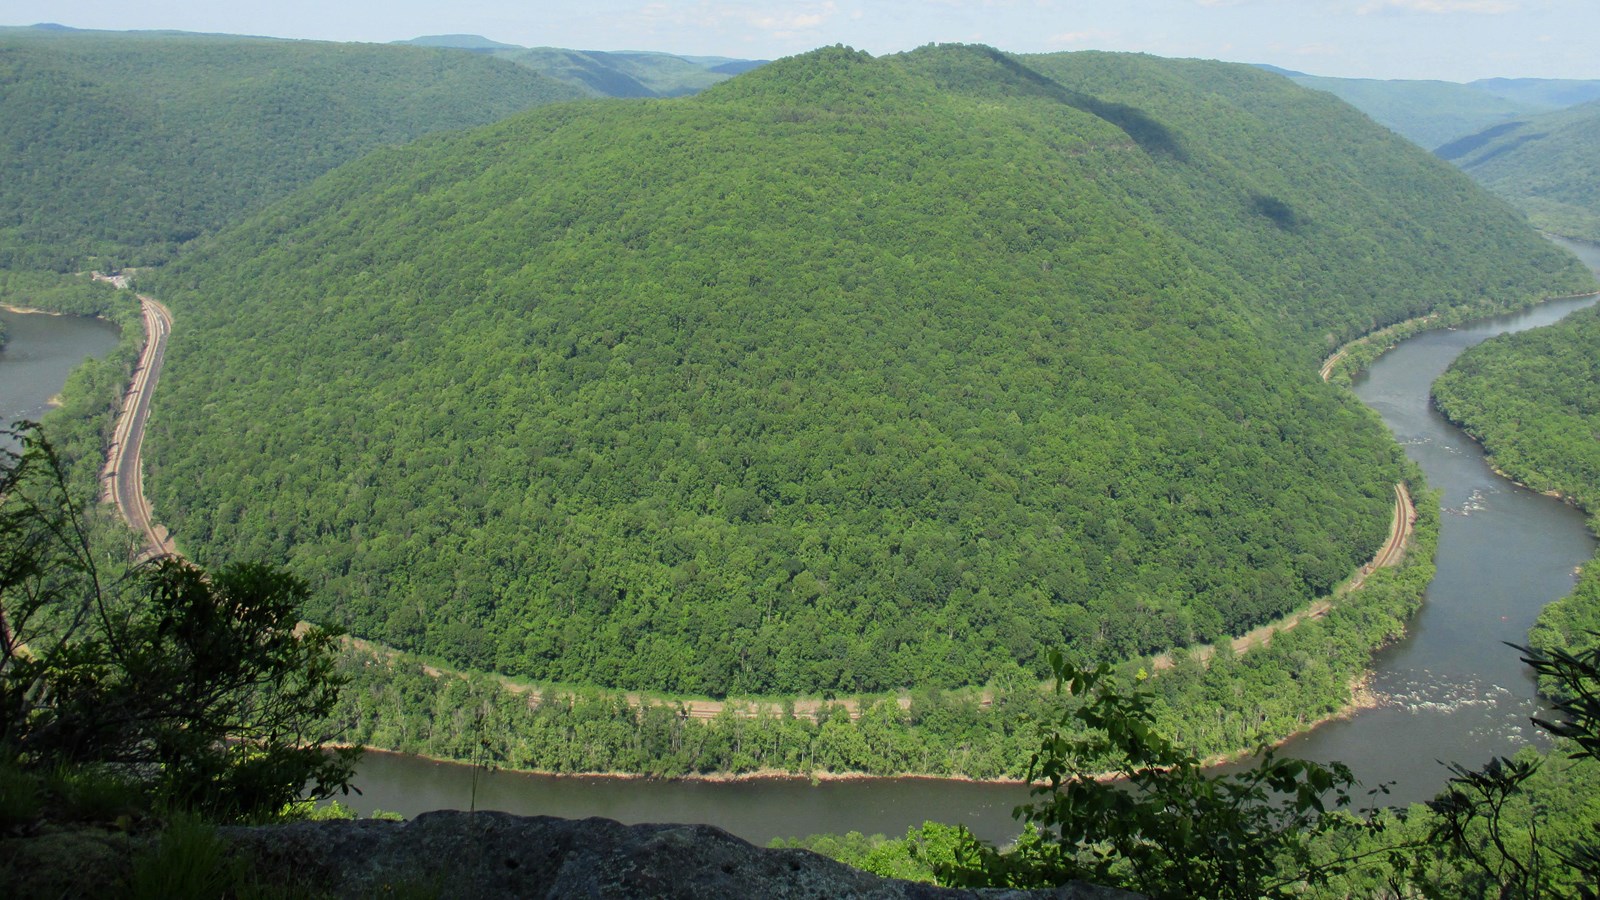 view of a river and deep forested gorge